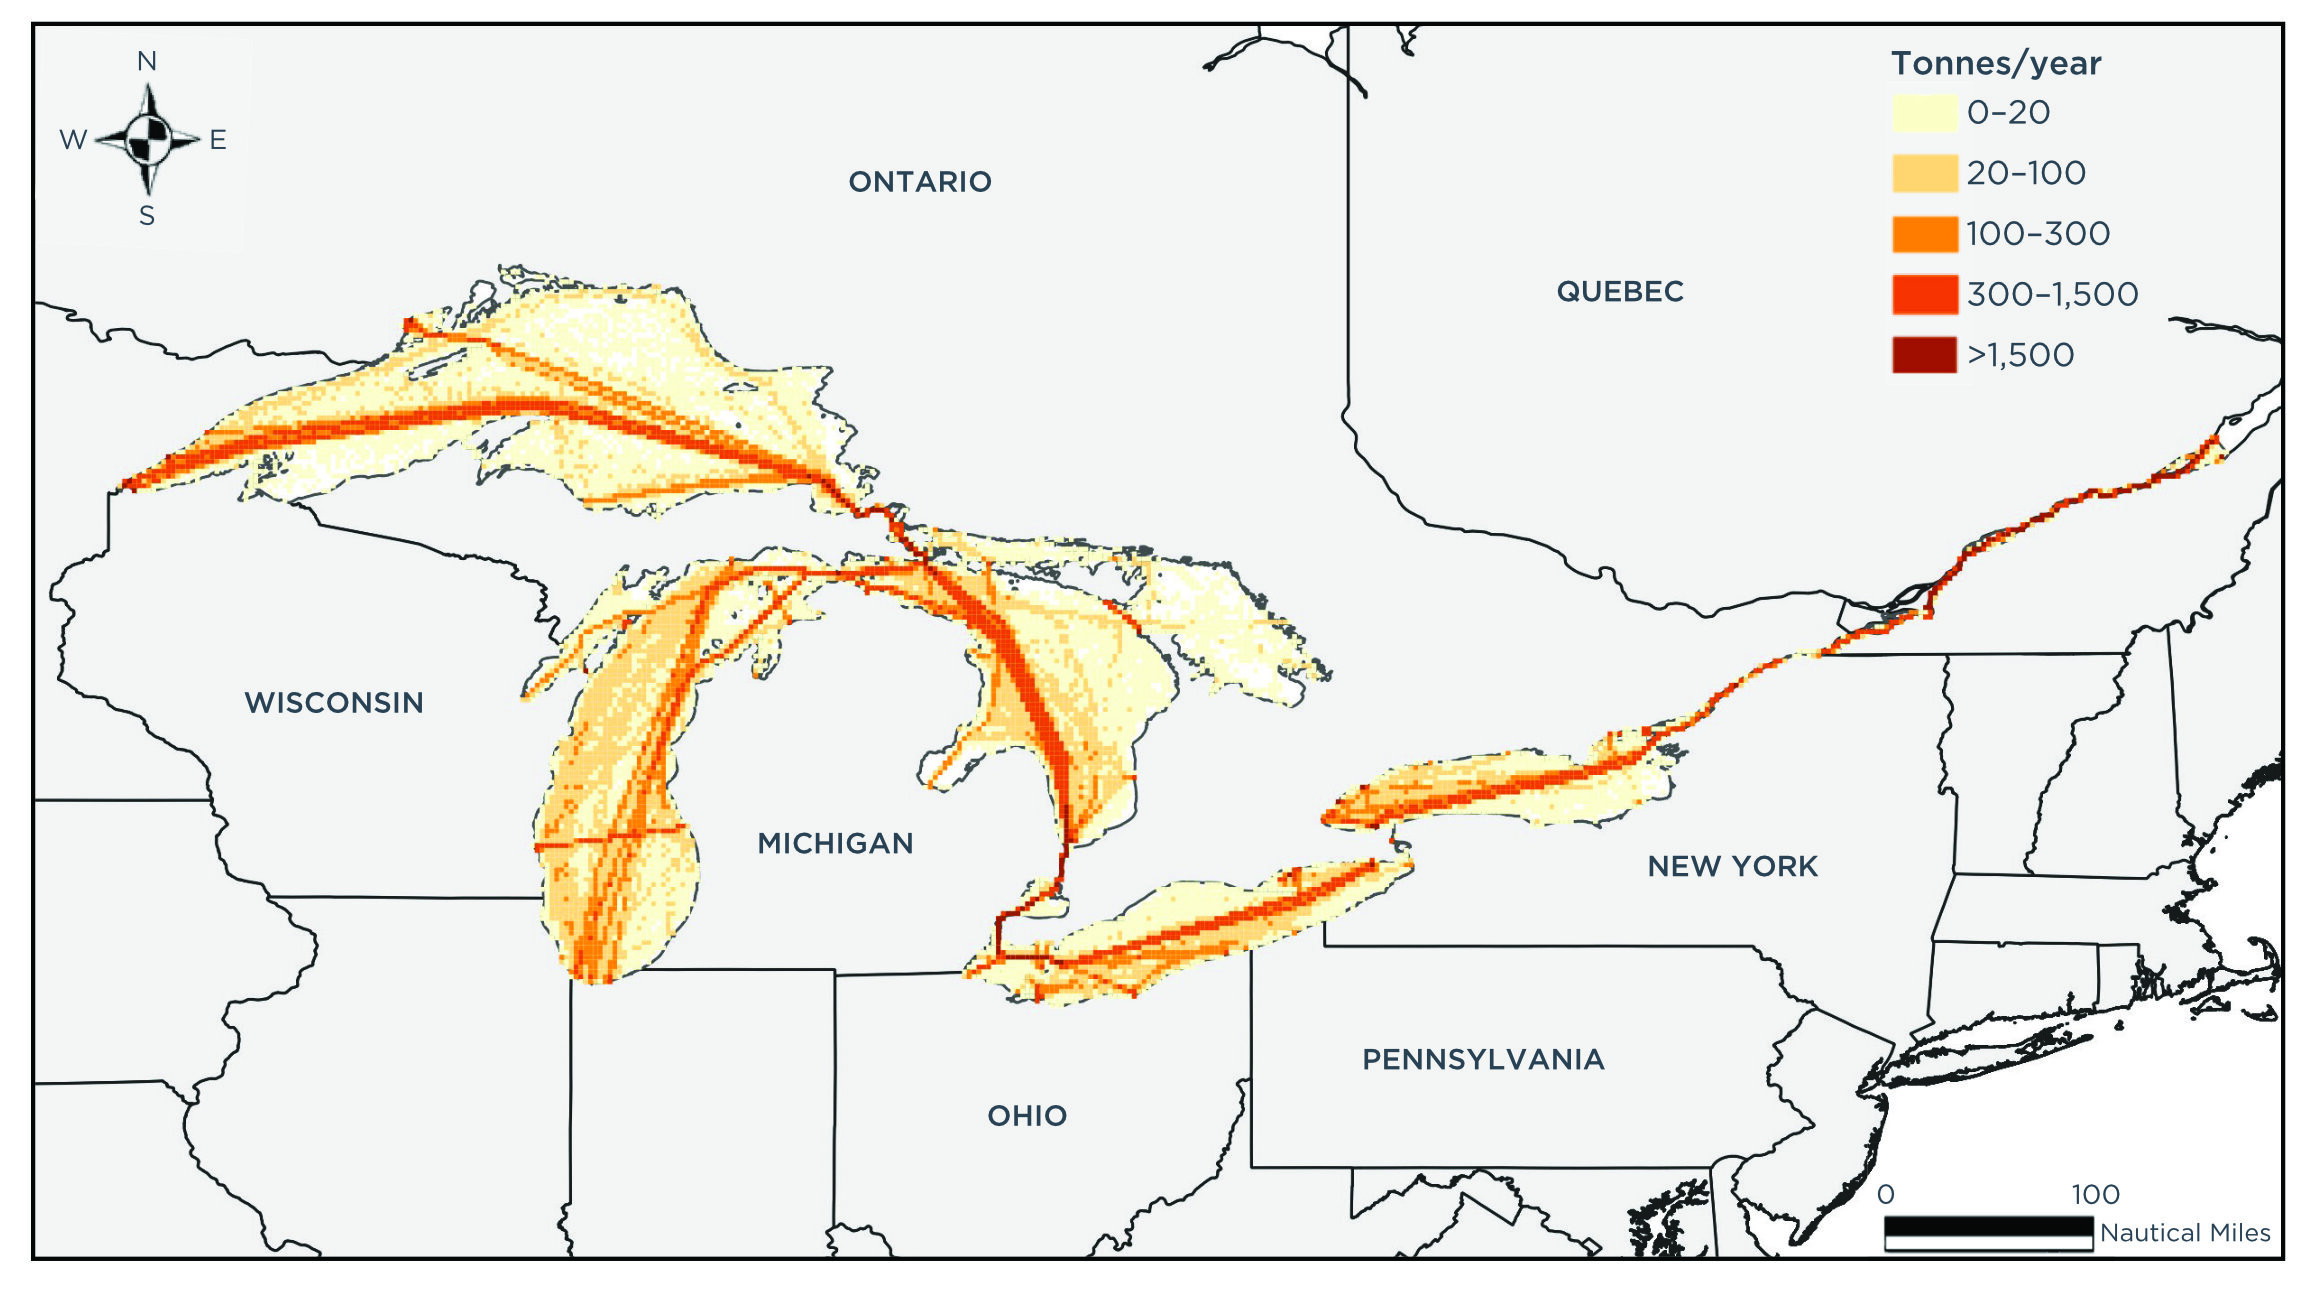 Tracking greenhouse gas emissions from ships in the Great Lakes-St. Lawrence Seaway